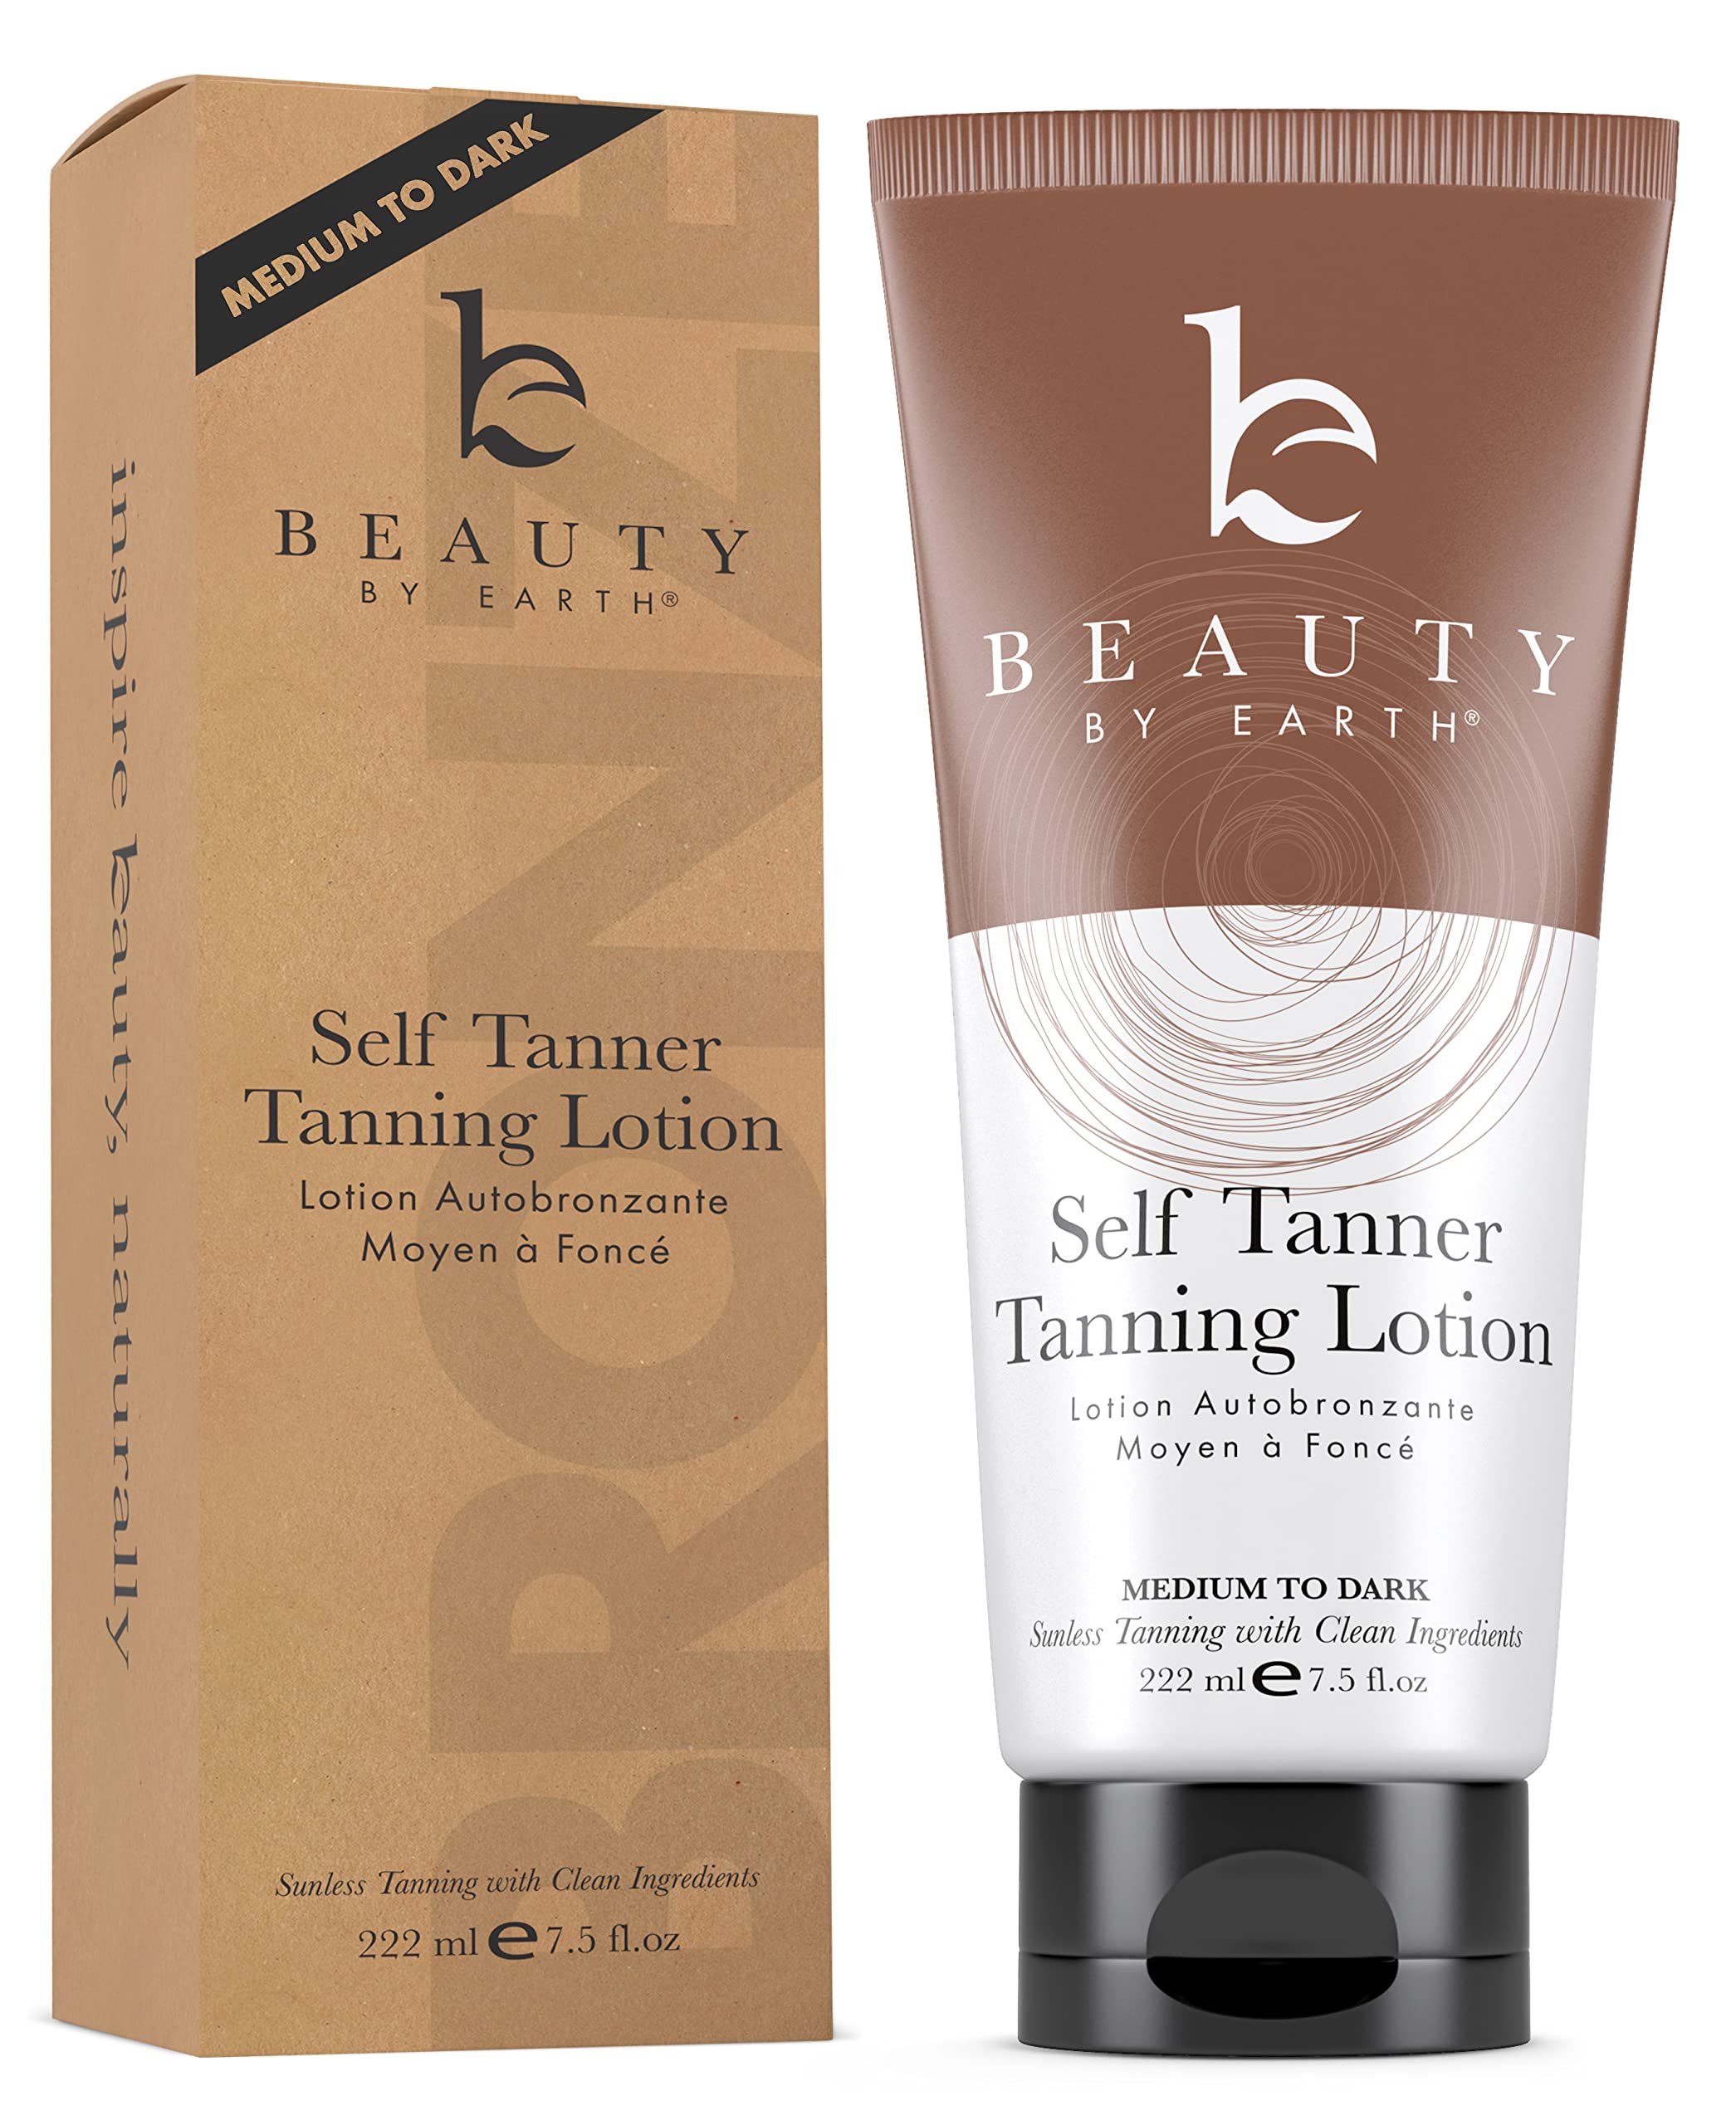 Beauty by Earth Self Tanner Tanning Lotion - Tanner with Ingredients for Natural Glow, Long Lasting Fake Tan Lotion, Body Bronzer Quick Tan Tanning Cream, Medium to Dark Self Tanner